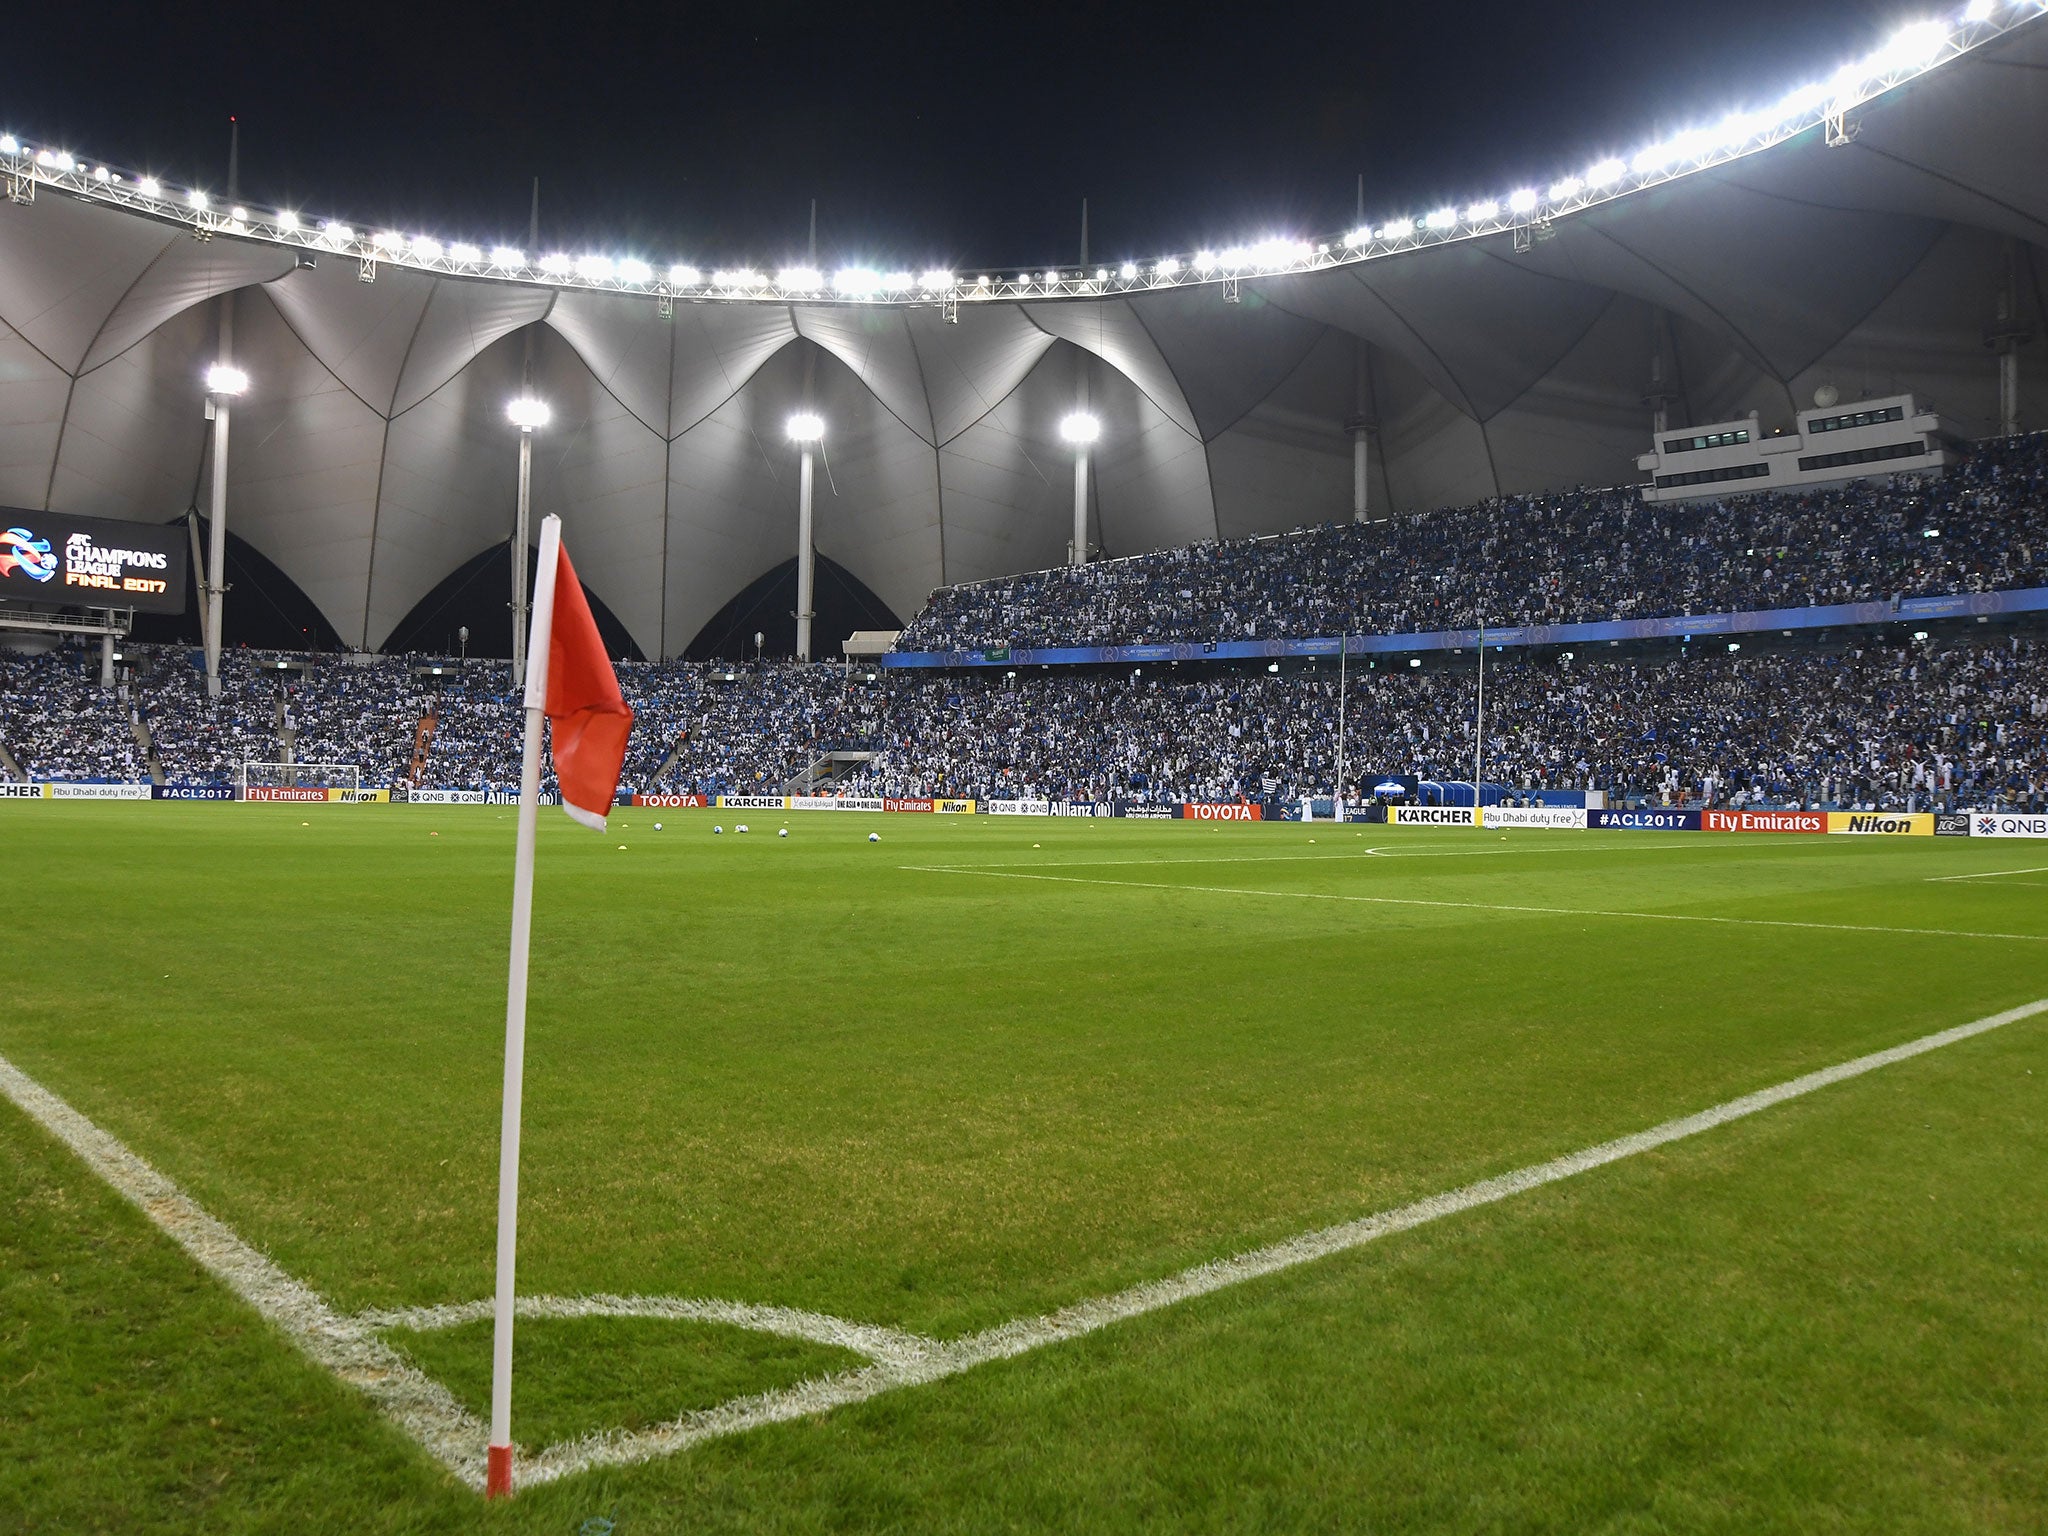 The King Fahd Stadium has been specially 'adapted' to cater for women and families